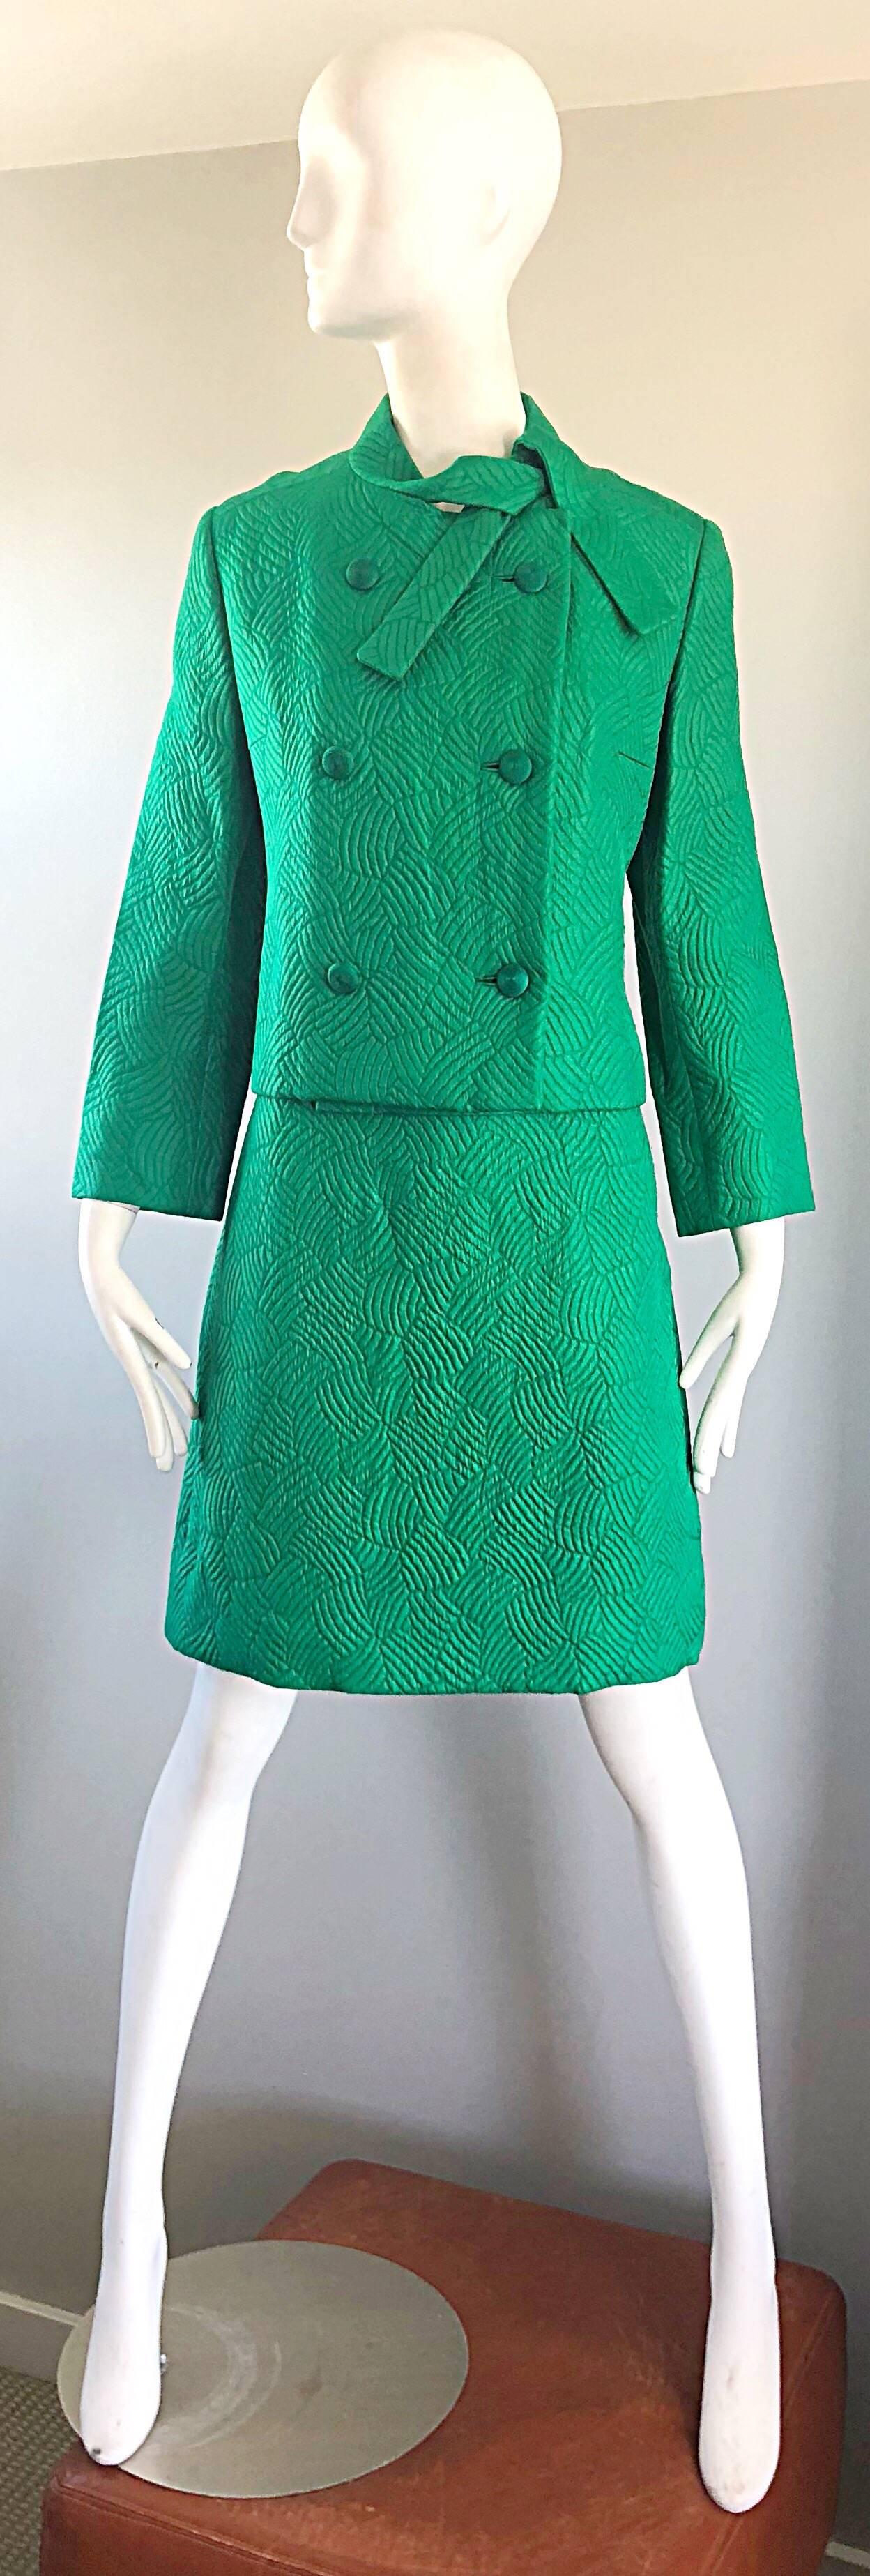 Chic 1960s Kelly Green Quilted Silk Dress and Cropped Jacket Vintage 60s Set 10